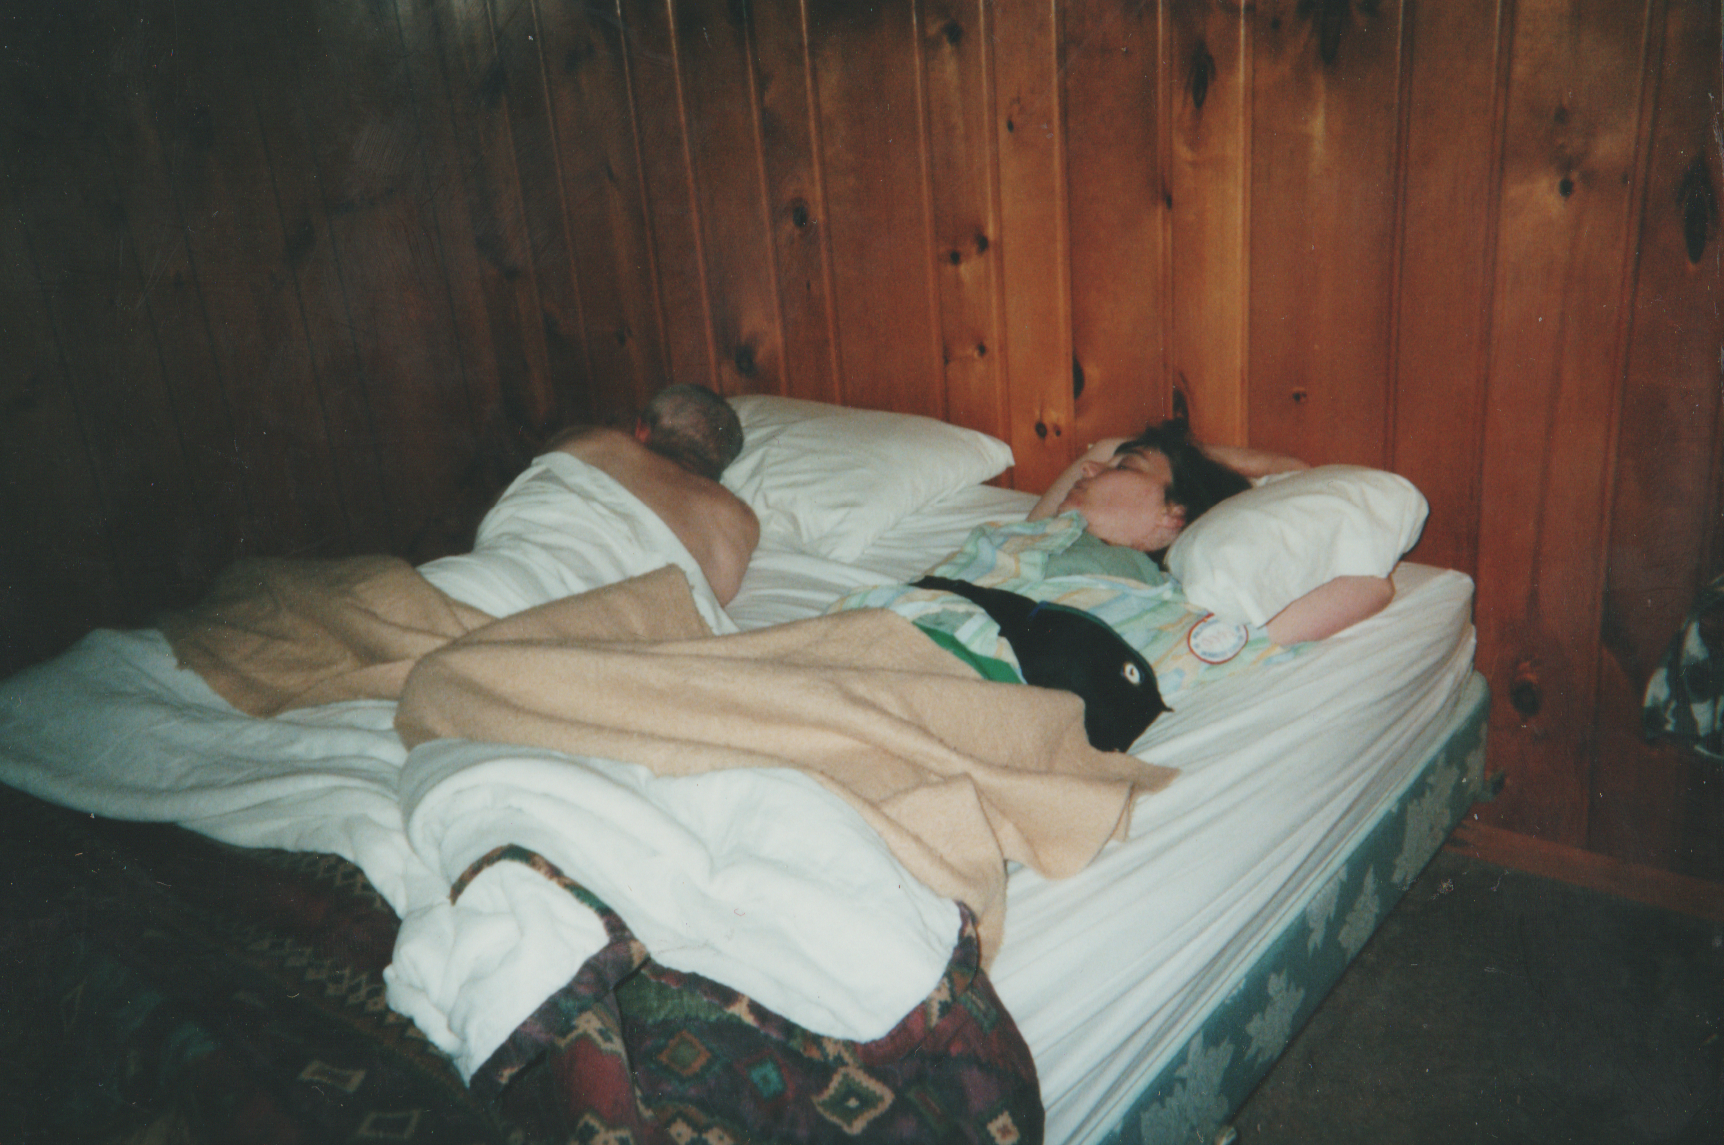 2000-07-23 maybe - mom and dad, bed, cabin, reunion.png